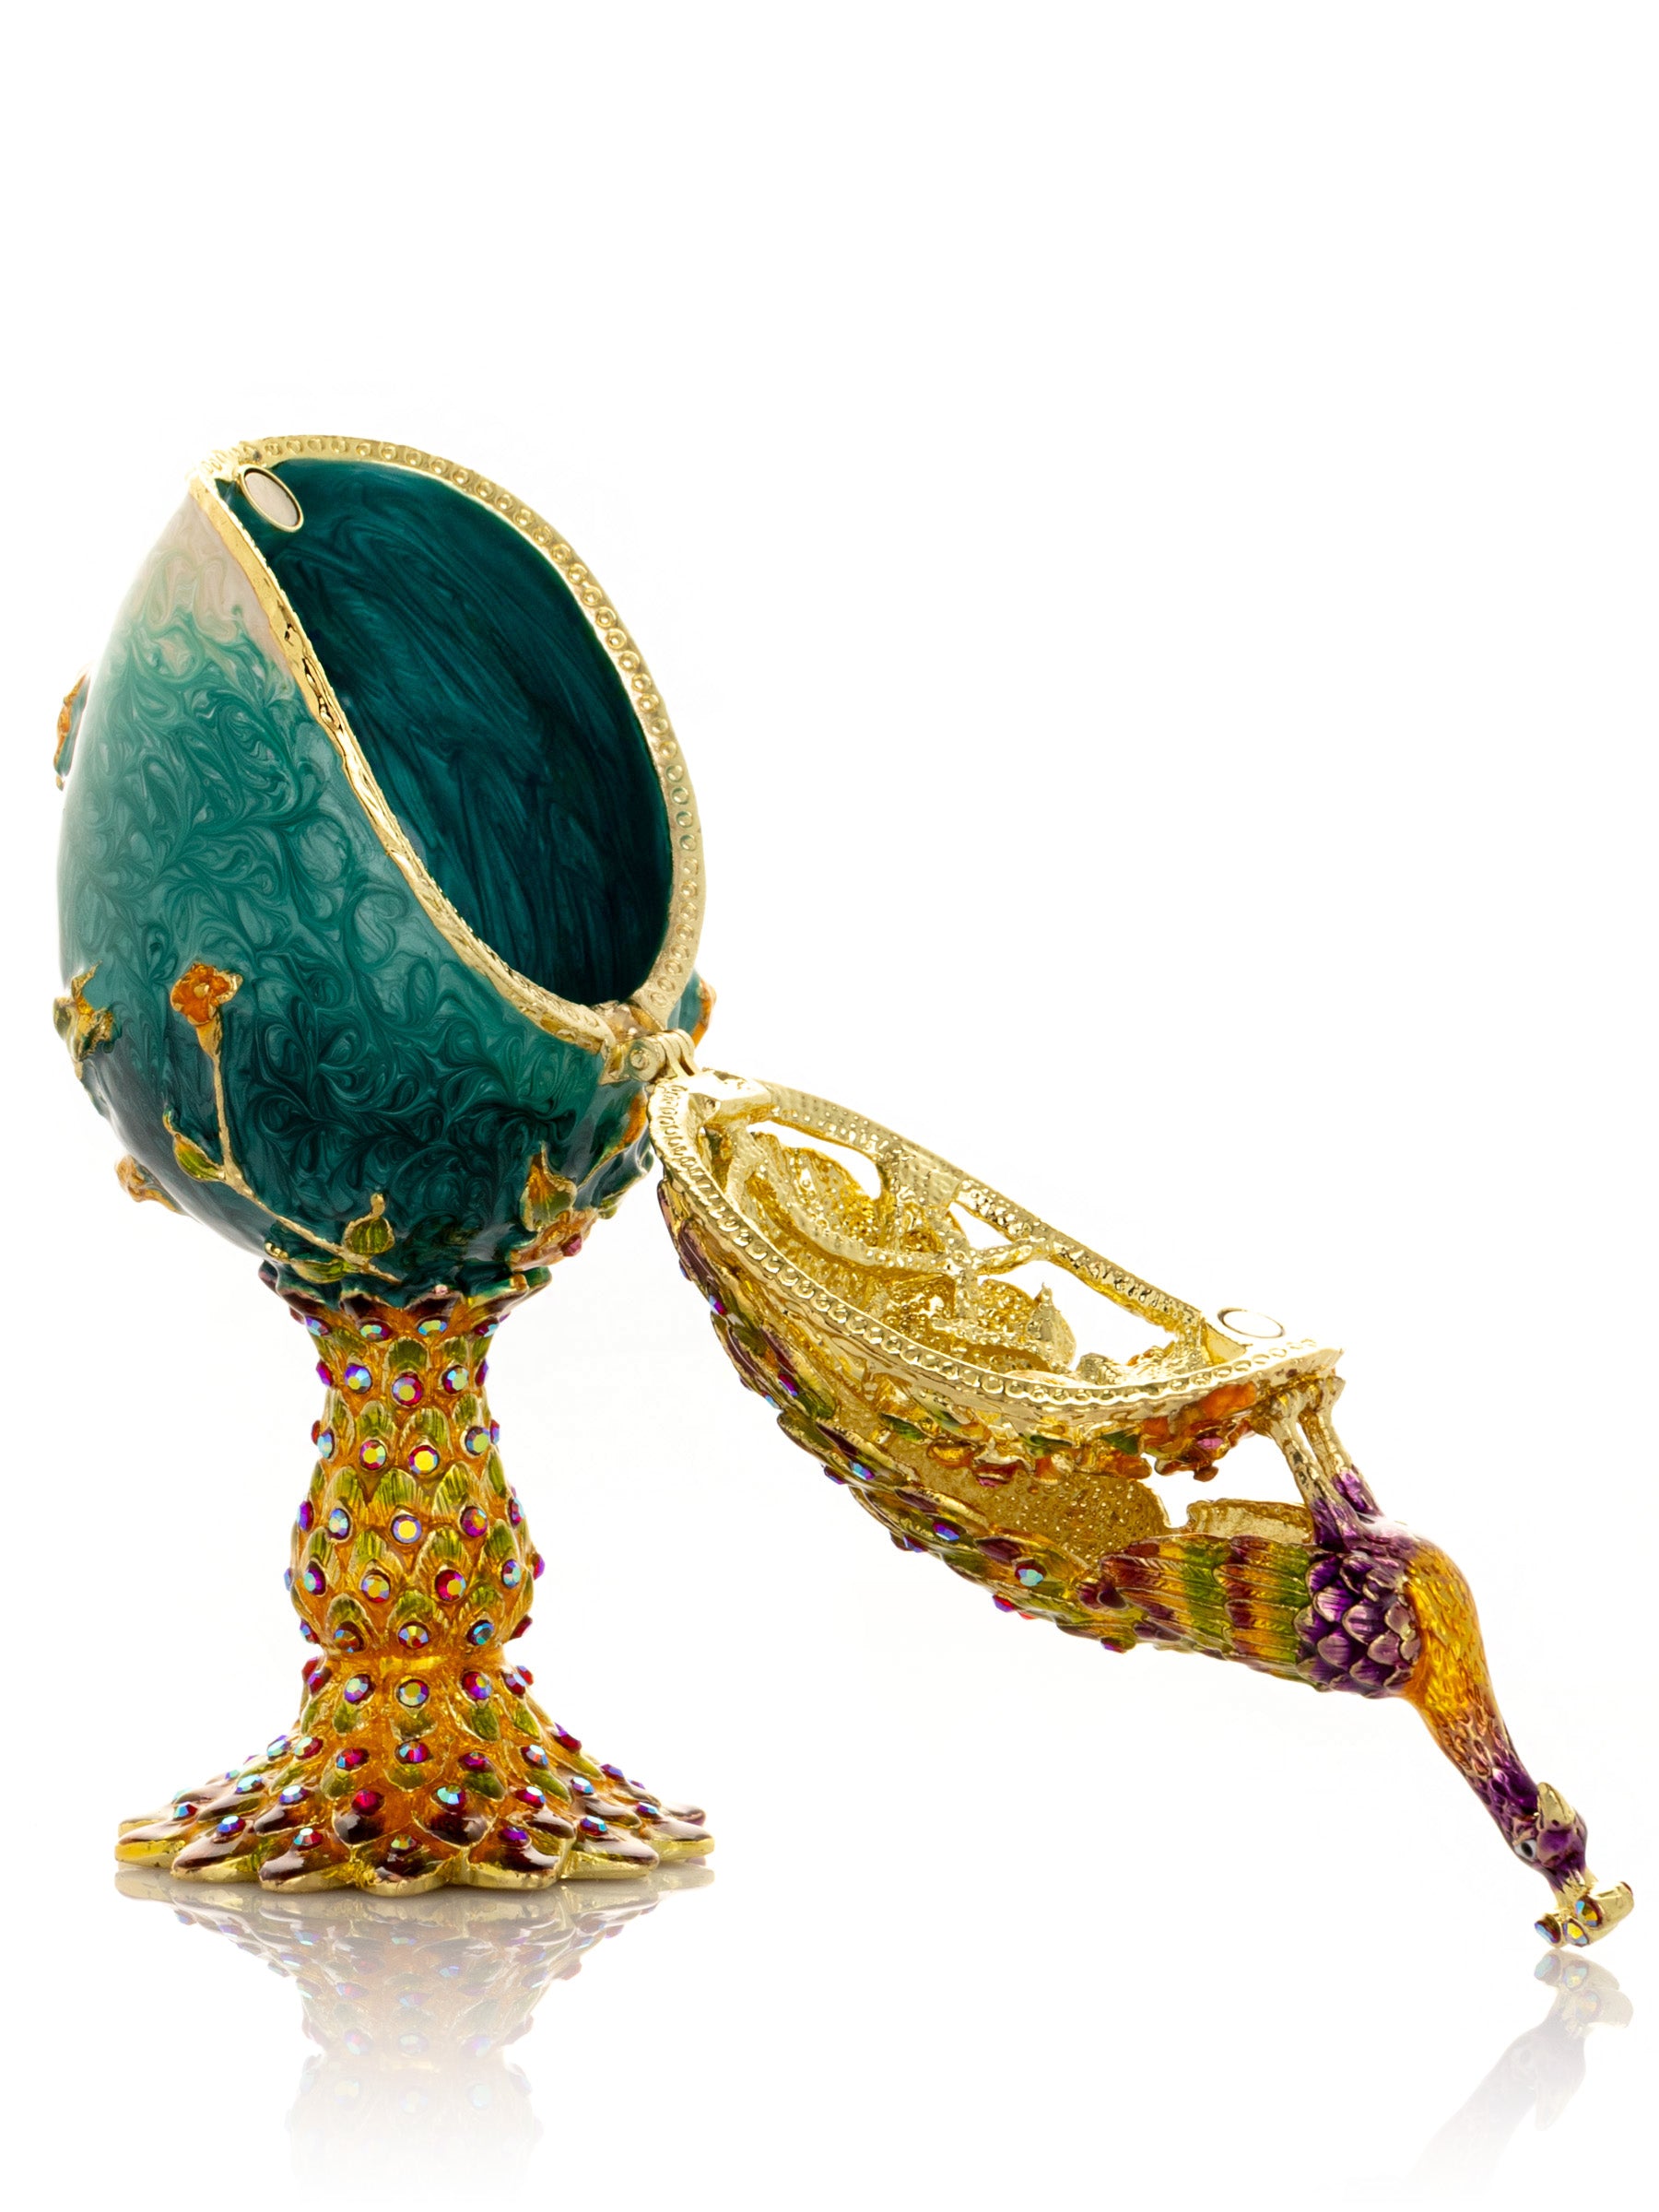 Peacock on a Faberge Egg